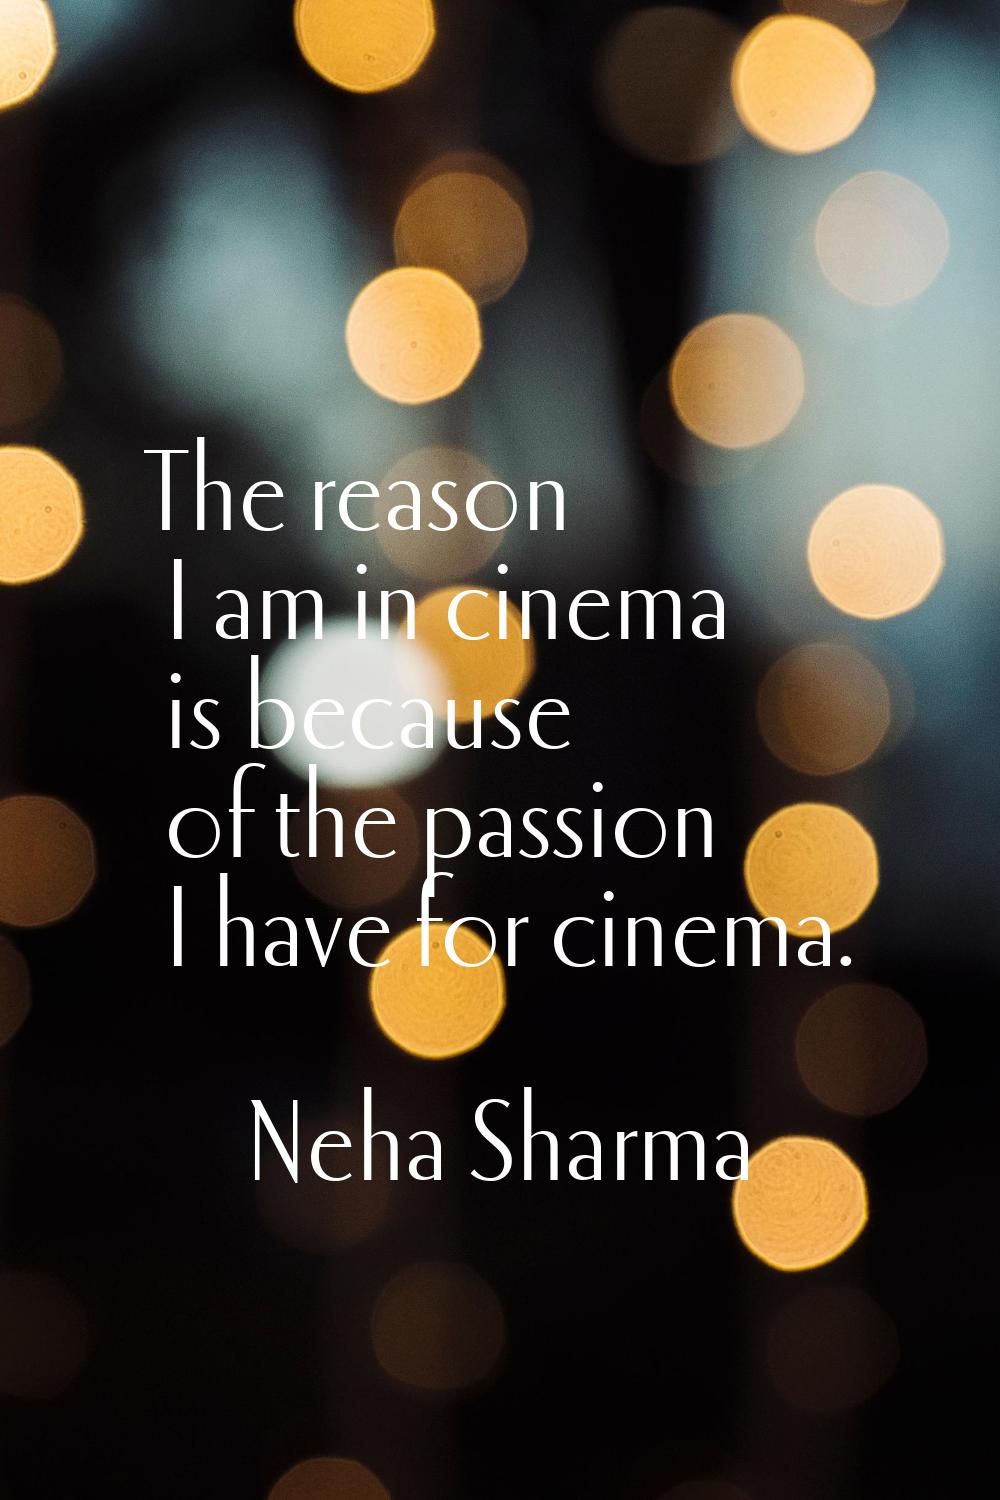 The reason I am in cinema is because of the passion I have for cinema.